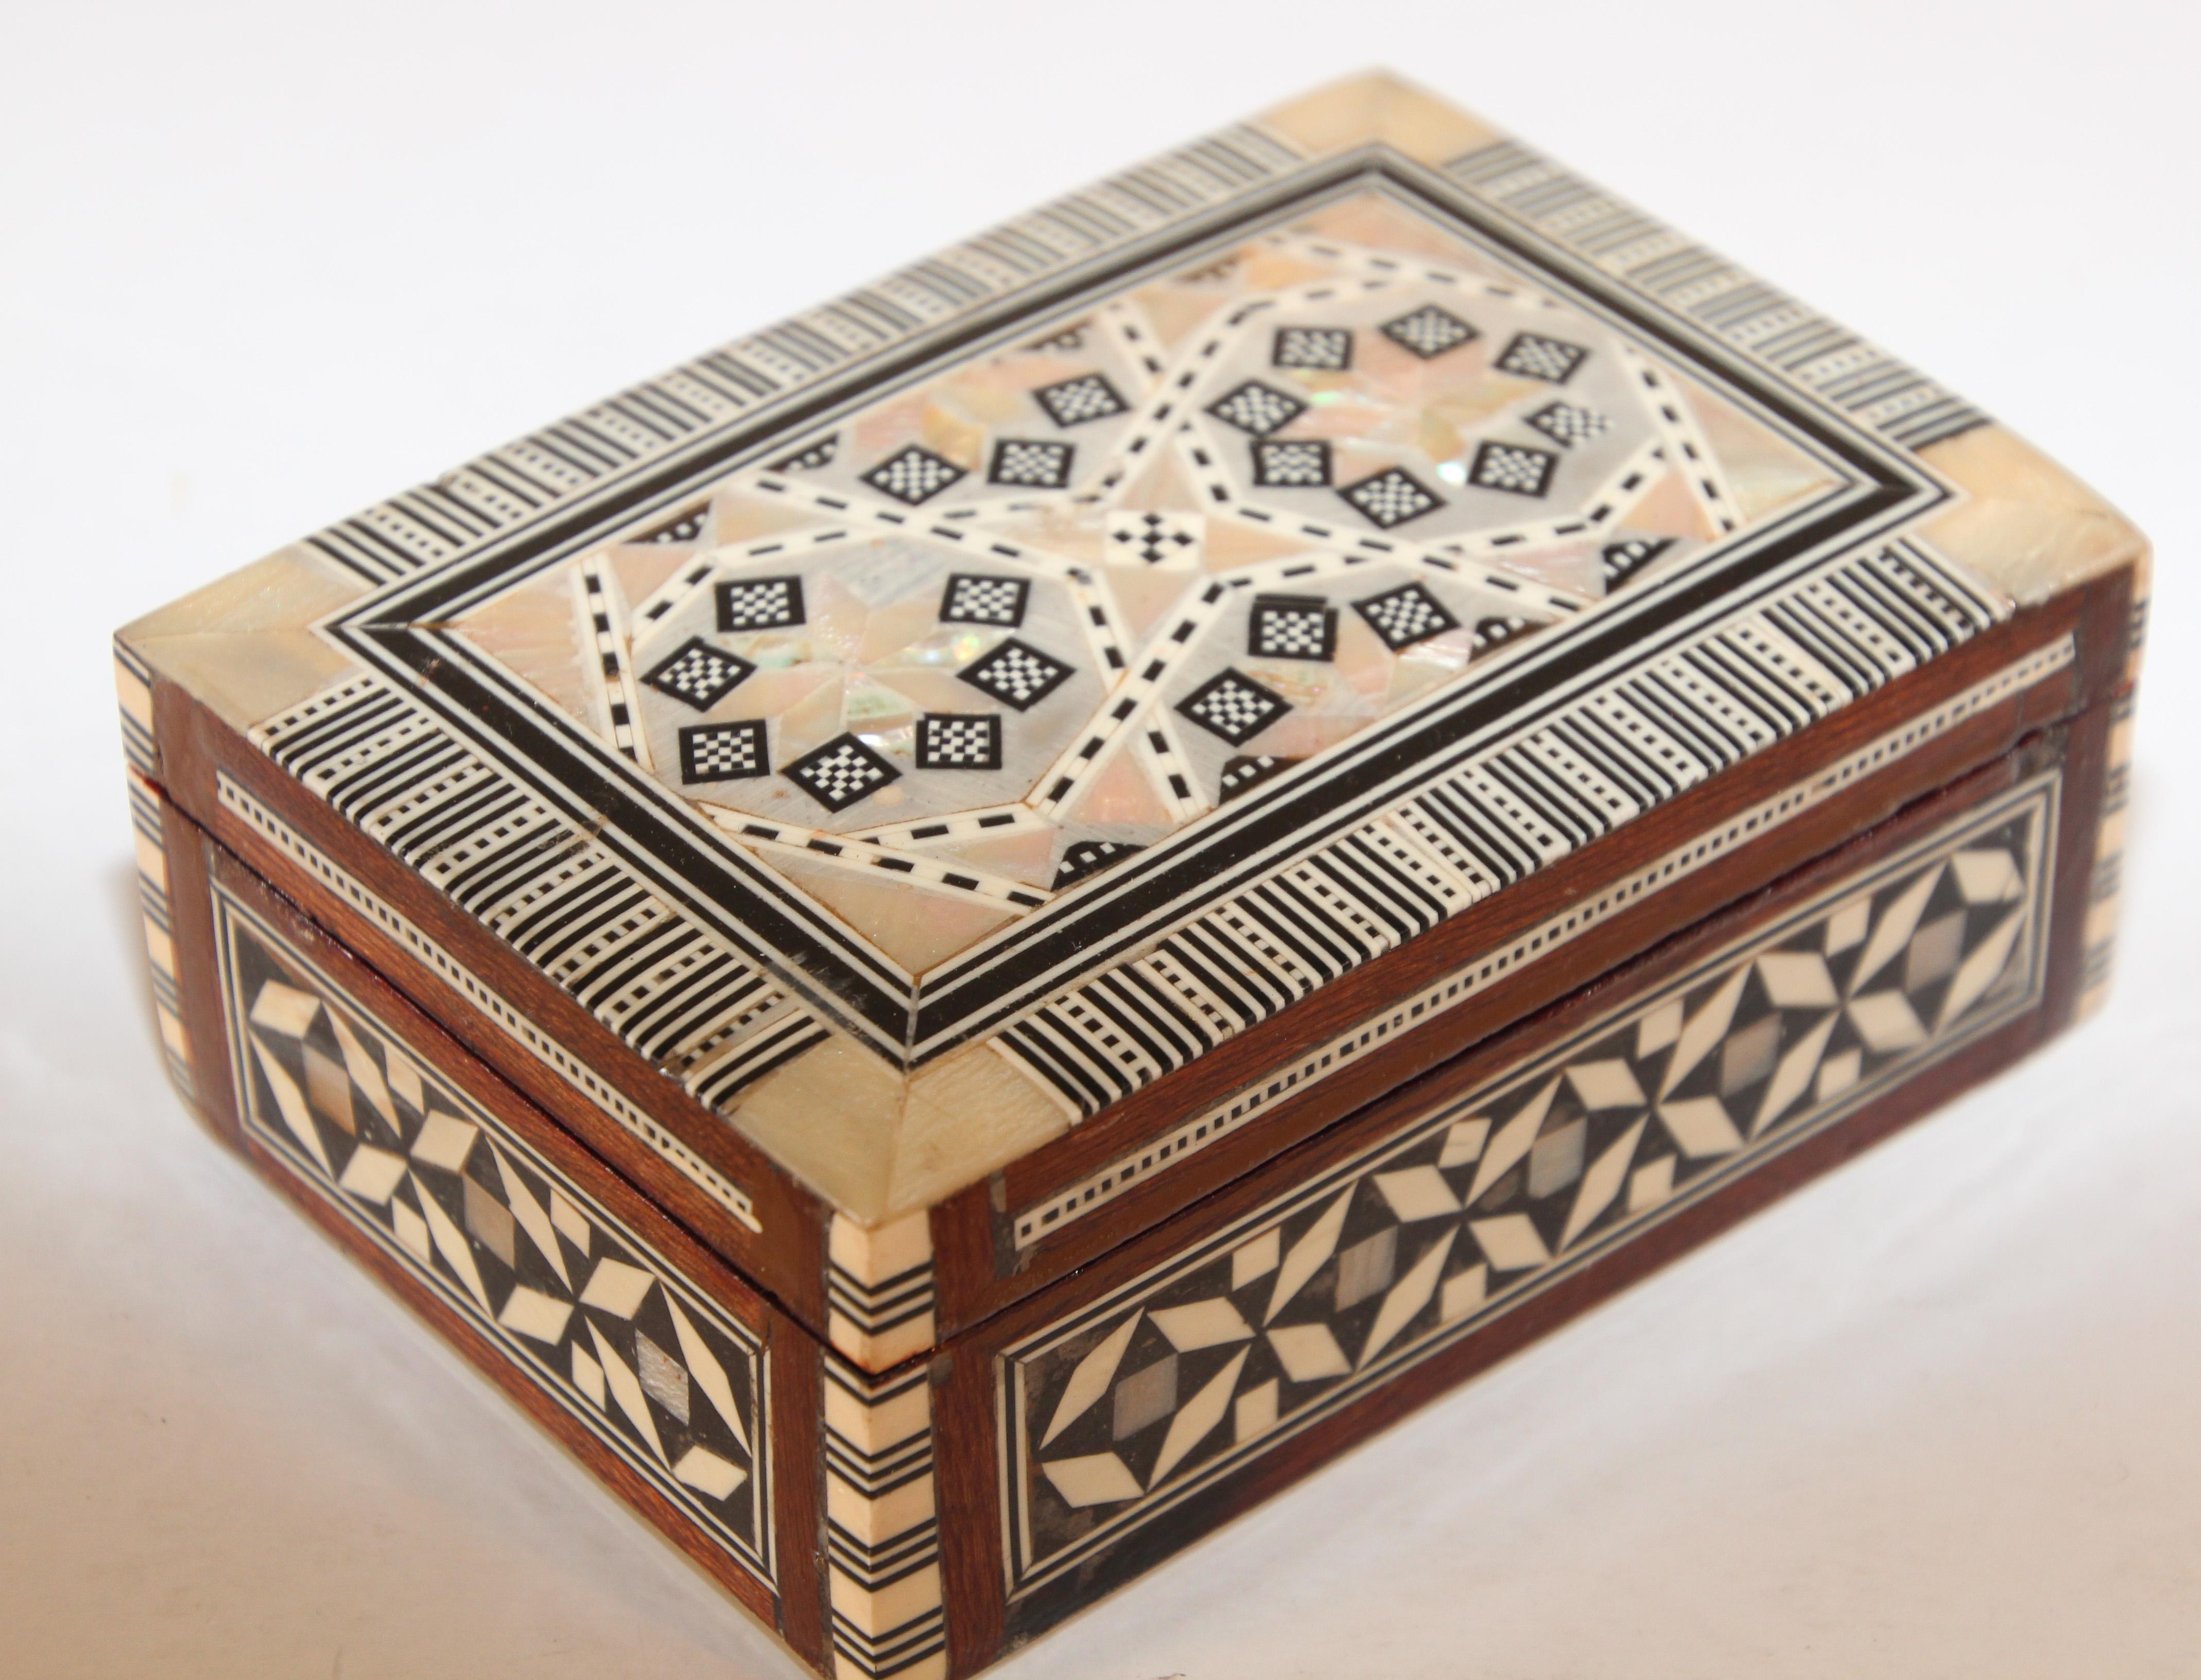 Exquisite handcrafted Middle Eastern mosaic marquetry inlaid walnut wood box.
Small box intricately decorated with Moorish motif designs which have been painstakingly inlaid with mosaic marquetry, mother of pearl and fruitwoods.
Middle Easter,